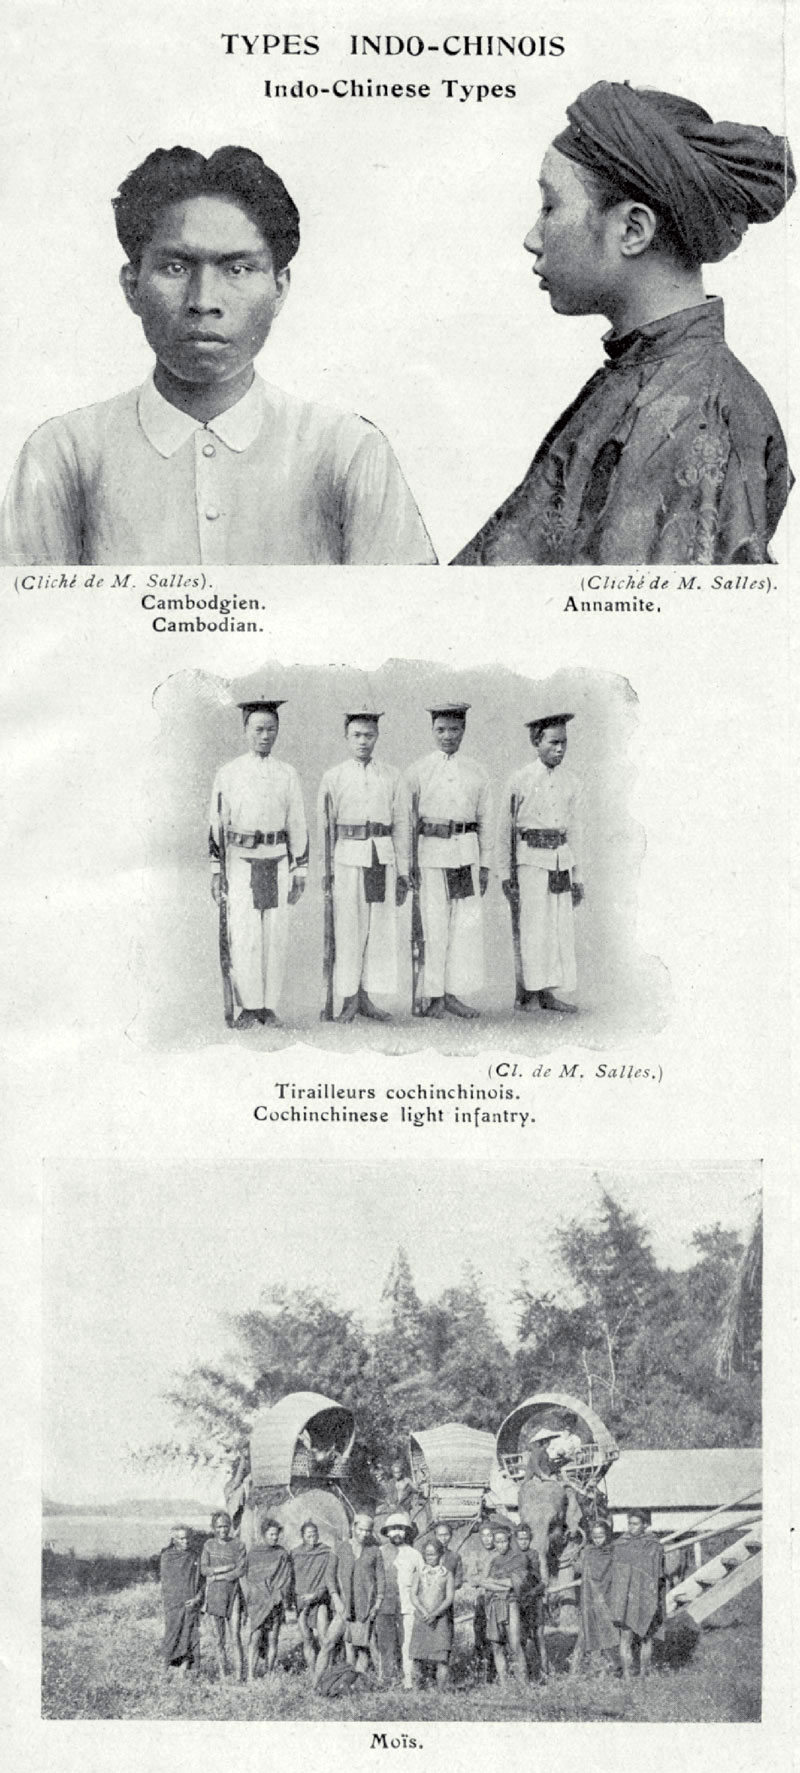 From Comité de Tourisme Colonial, Indochine (published before 1915) .